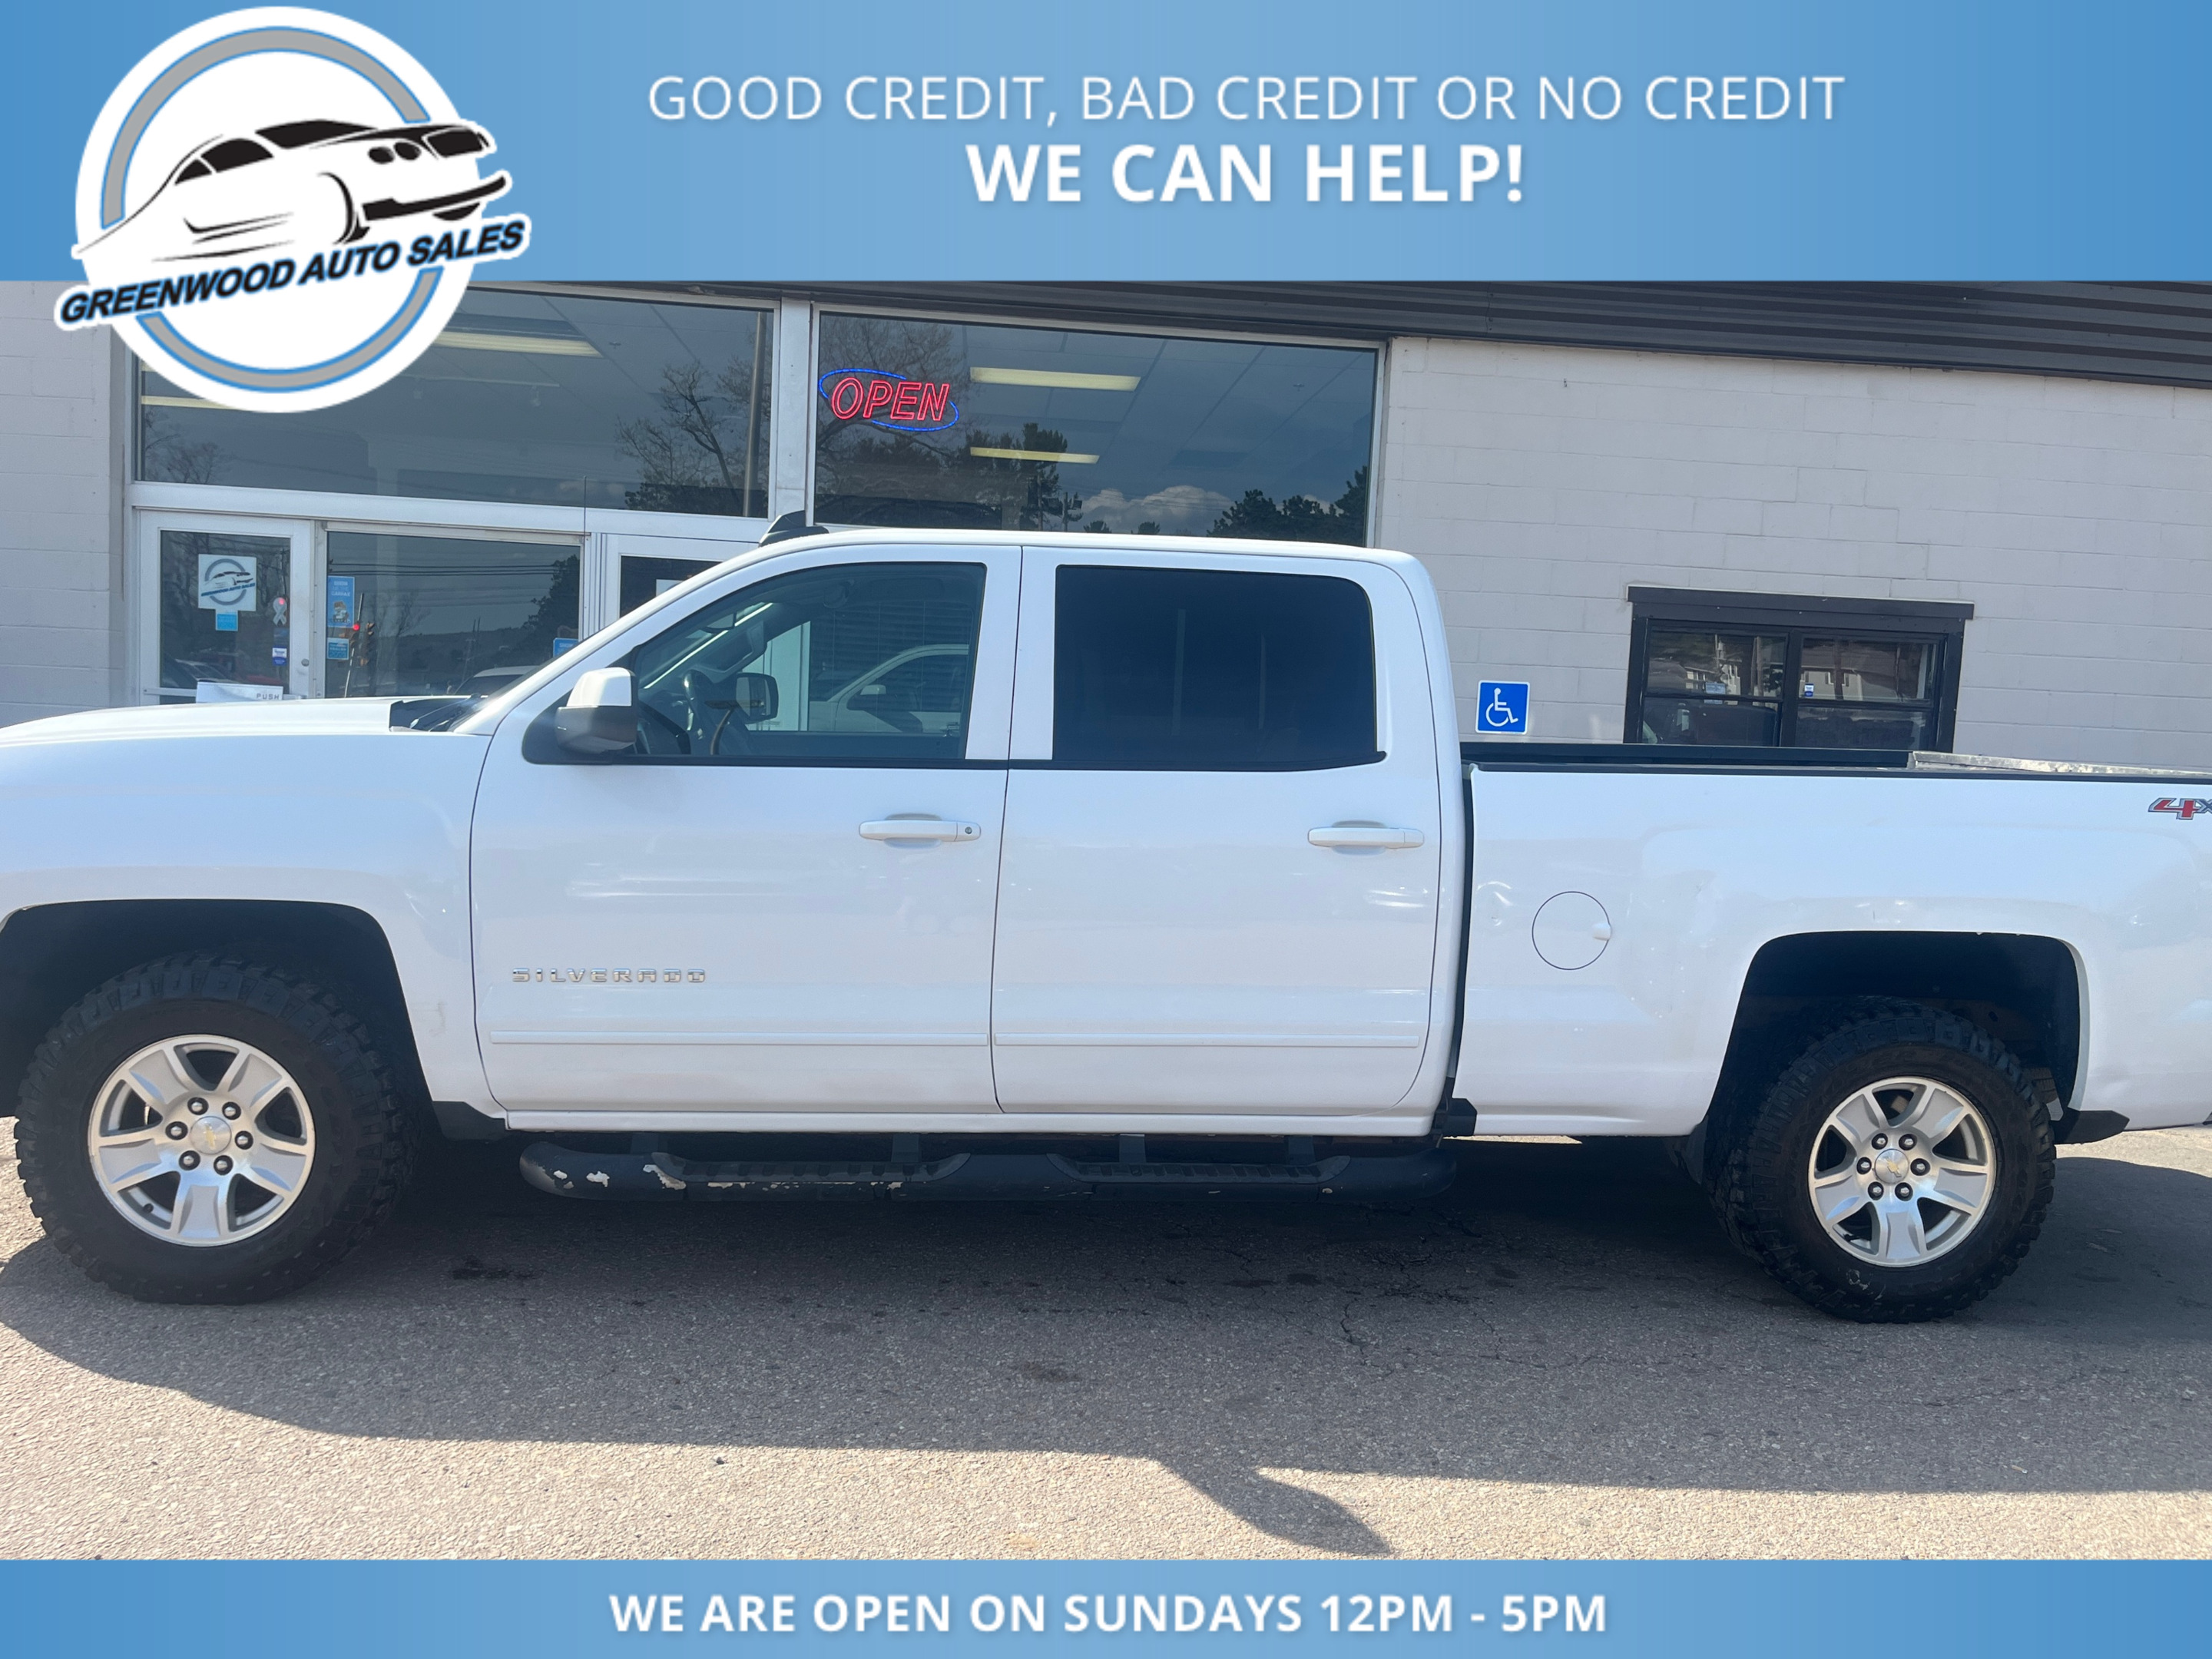 2017 Chevrolet Silverado 1500 2LT Aggresively Priced To Move, Call Now!! Fresh M